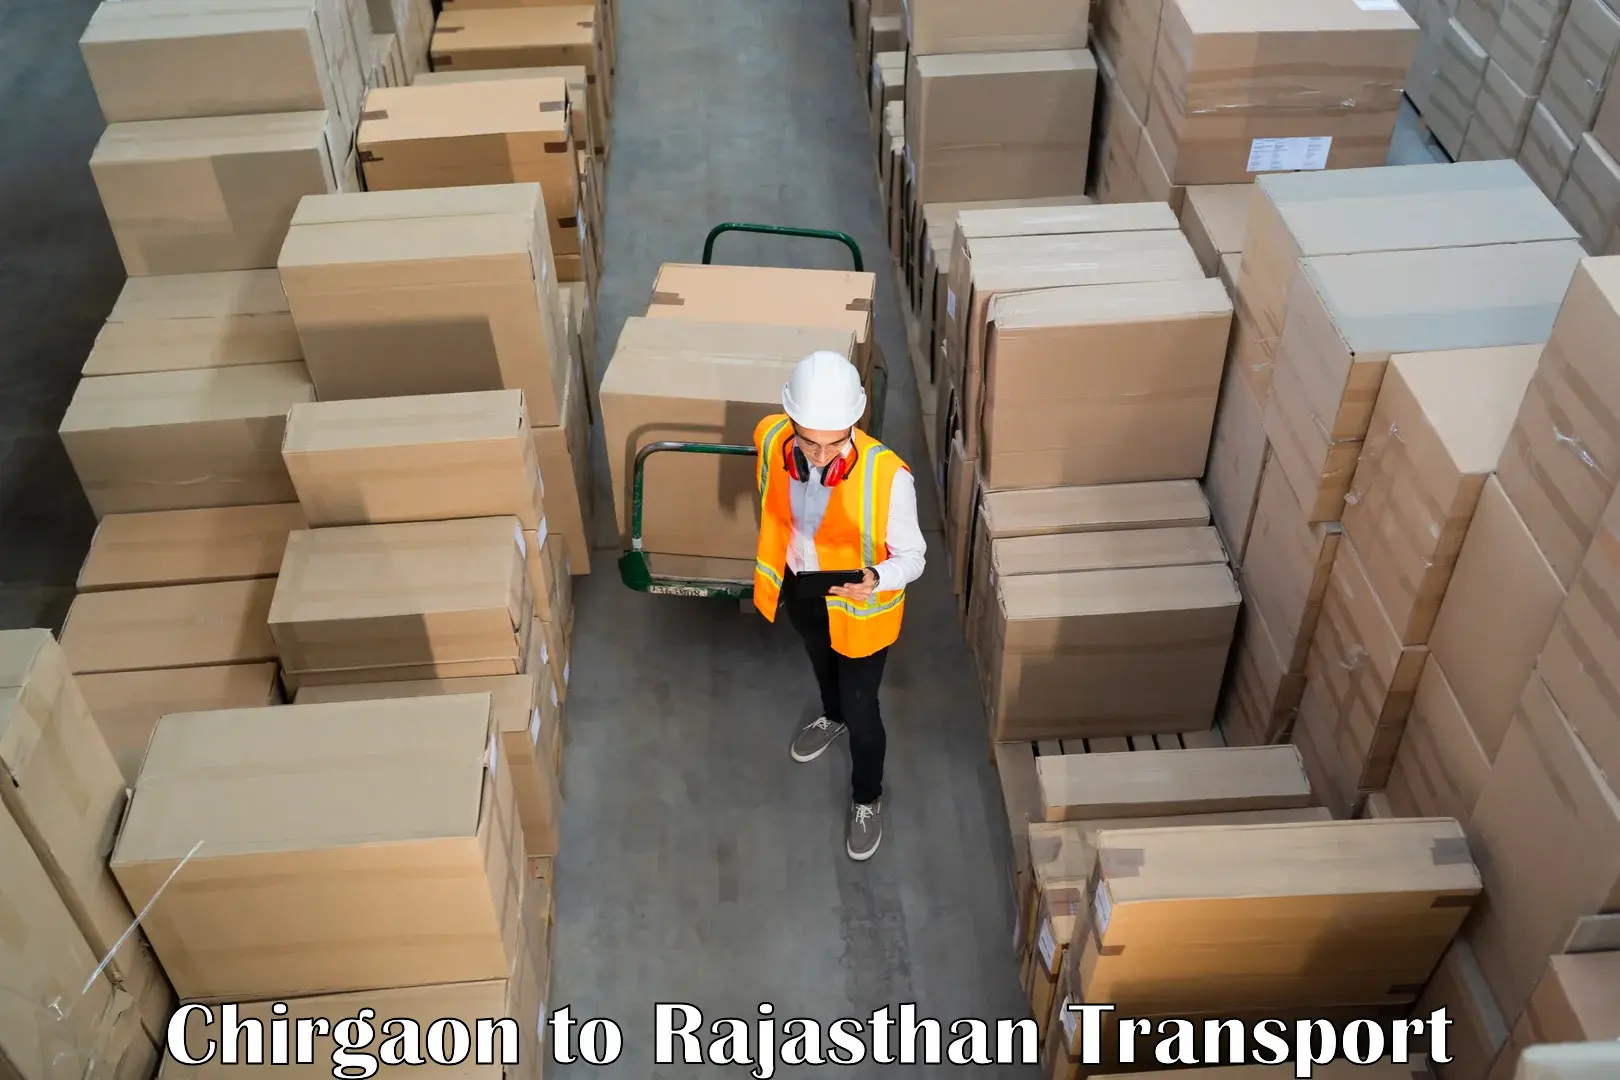 Truck transport companies in India Chirgaon to NIT Jaipur